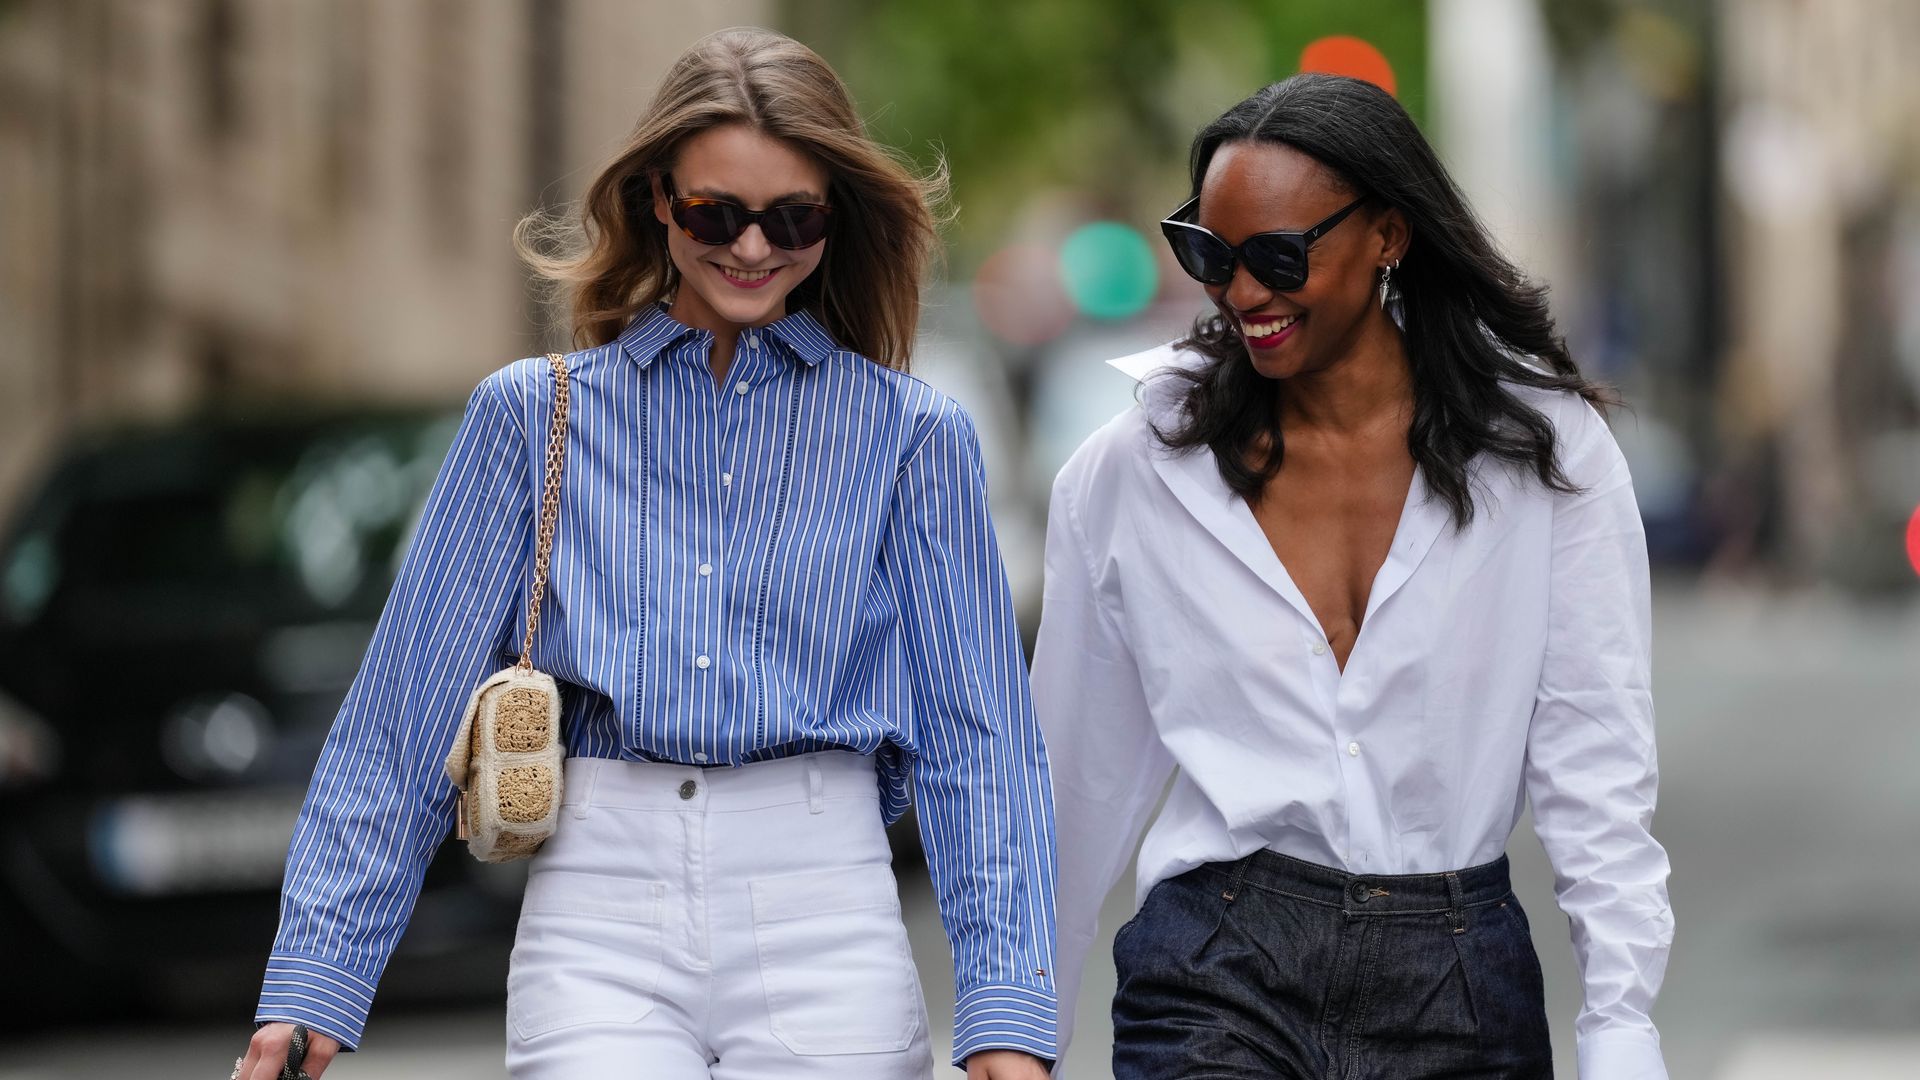 Segolene Hyppolite (L) wears sunglasses, a blue and white oversized shirt from Tommy Hilfiger, a raffia beige bag from Vanessa Bruno, high waist white denim pants from Vanessa Bruno; Emilie Joseph (R) wears a summer wardrobe capsule: an oversized white poplin button-down shirt from Figaret Paris, tucked into high-waisted denim bermuda/jorts/denim shorts, classic/basic/timeless accessories such as black sunglasses from the Korean fashion brand Gentle Monster, a small black top handle leather handbag,  during a street style fashion photo session, on May 20, 2024, in Paris, France. 